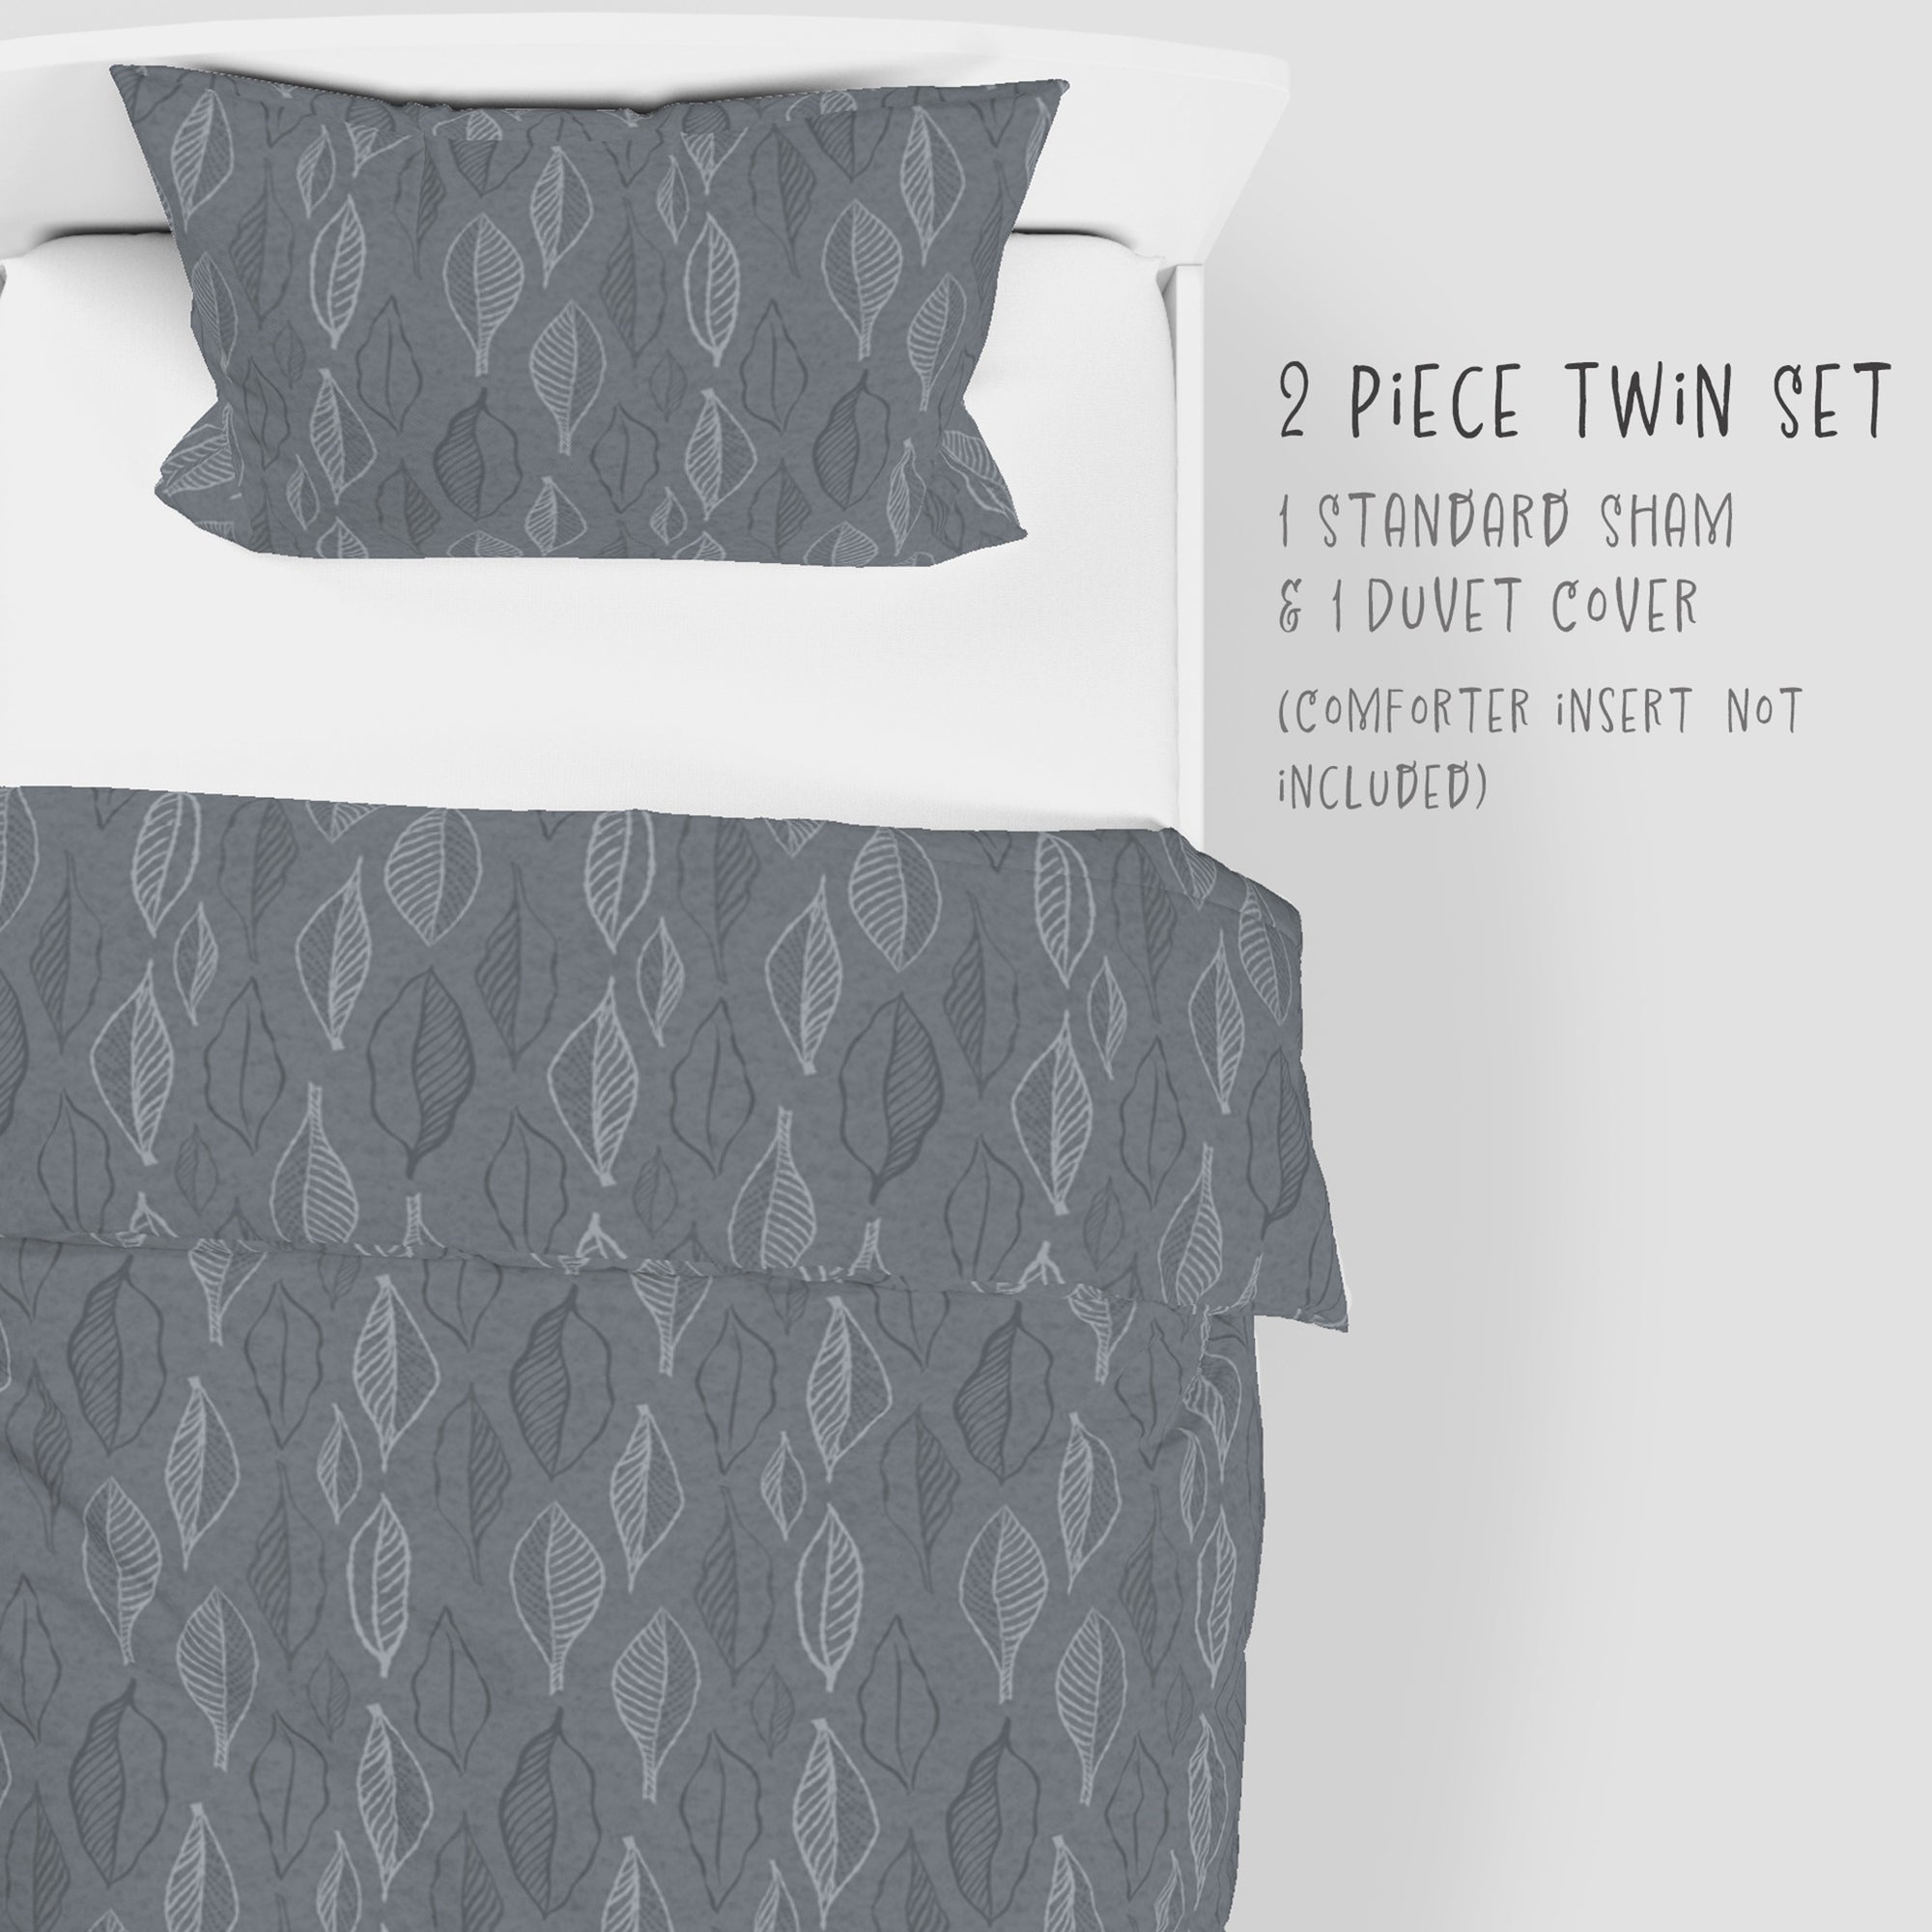 2 Piece Set for Twin sizes - Botanical Boho Fall Cabin Leaves Cotton Bedding comes with Duvet cover and one Sham